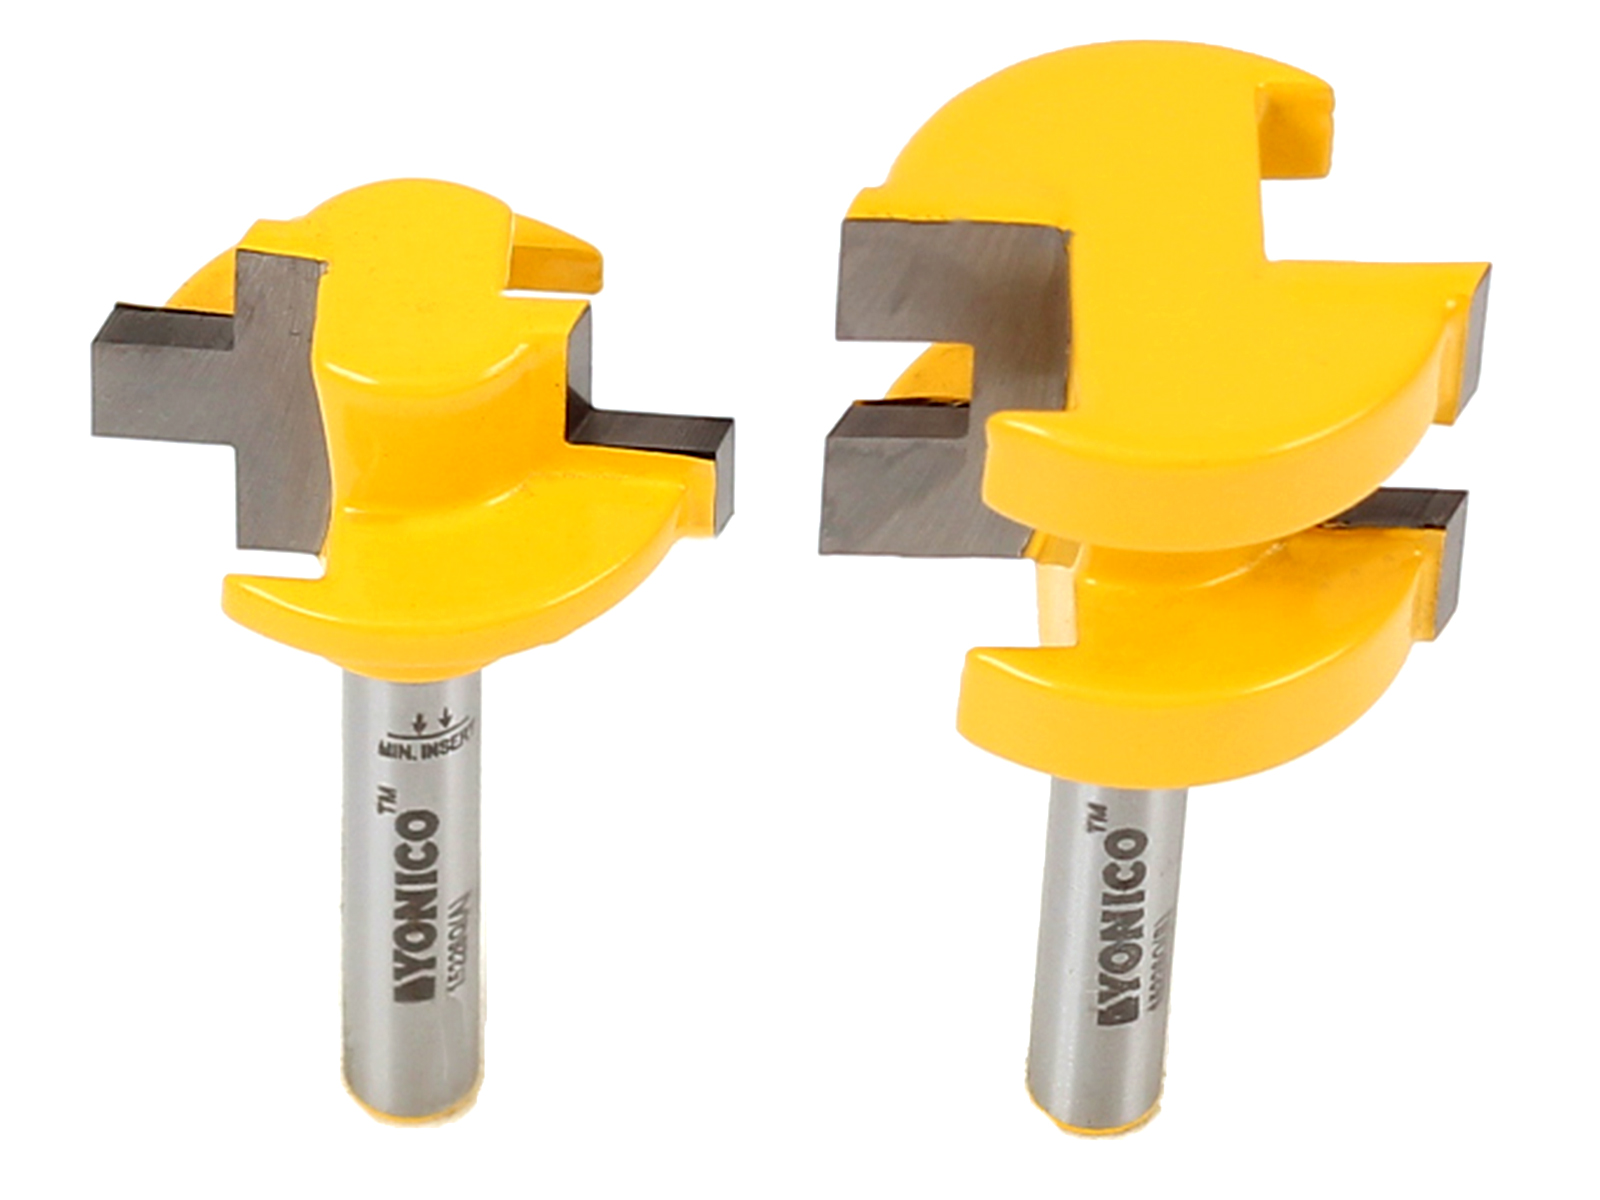 adjustable tongue and groove router bits